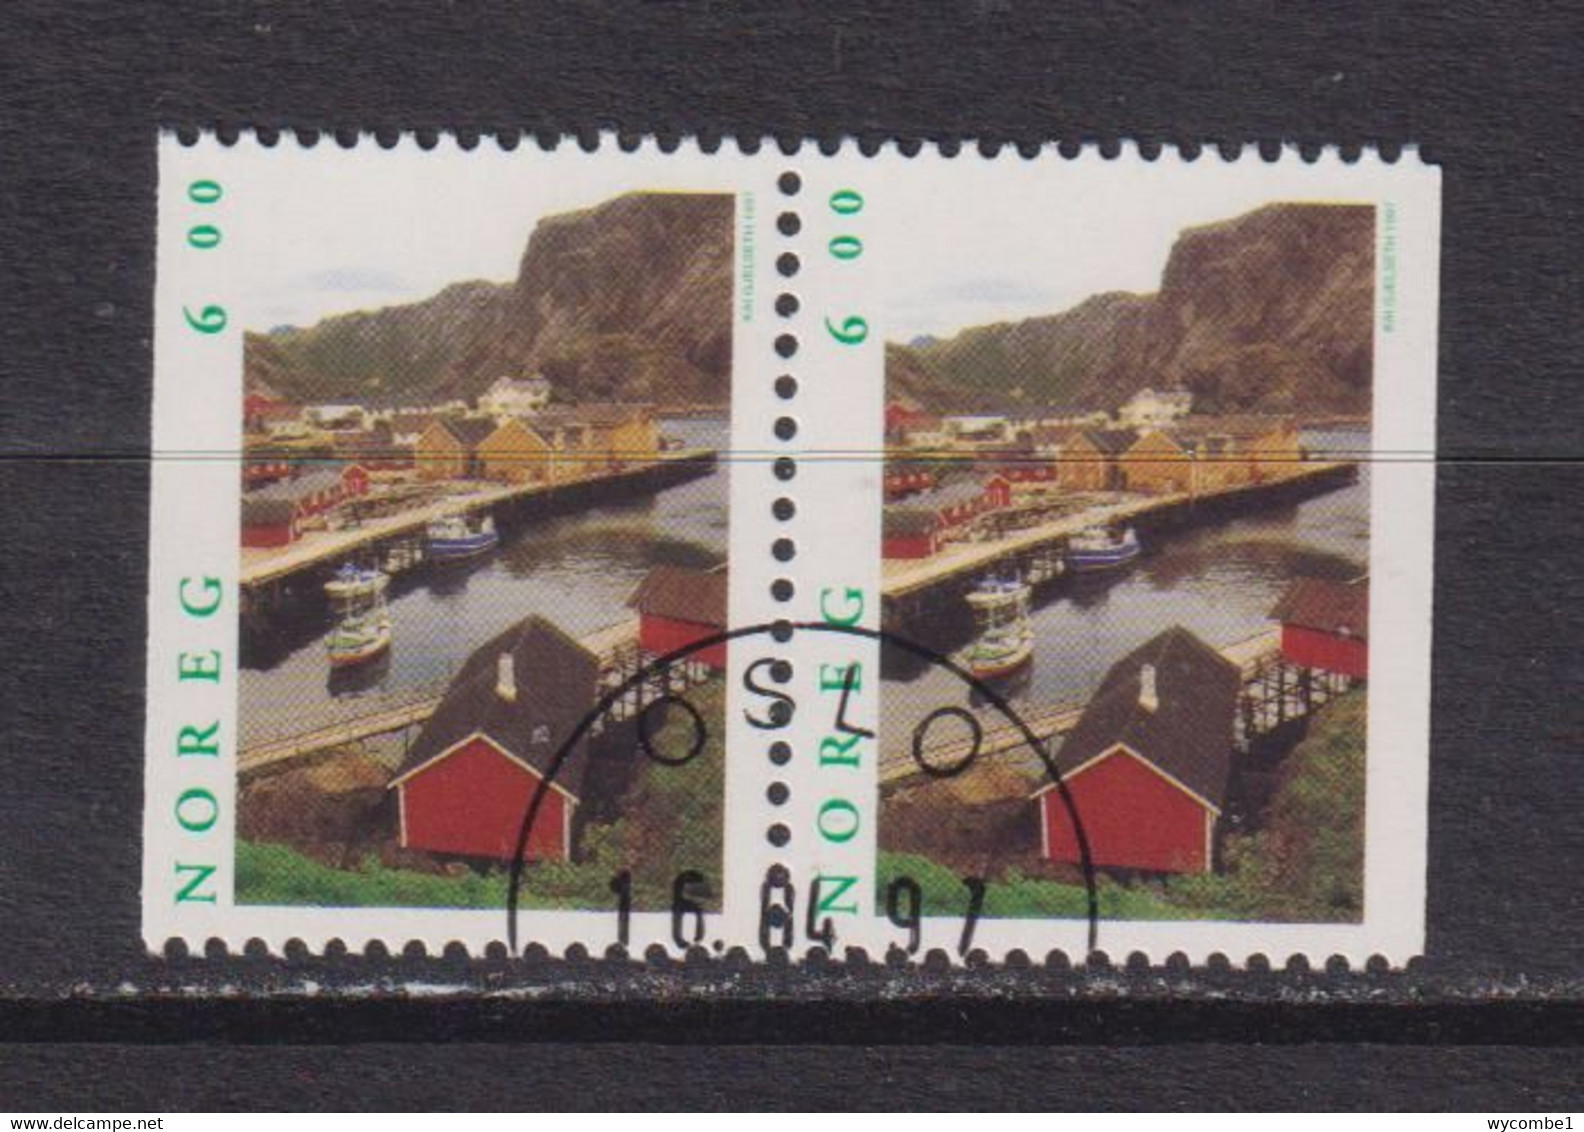 NORWAY - 1997 Tourism 6k  Booklet Pair  Used As Scan - Used Stamps